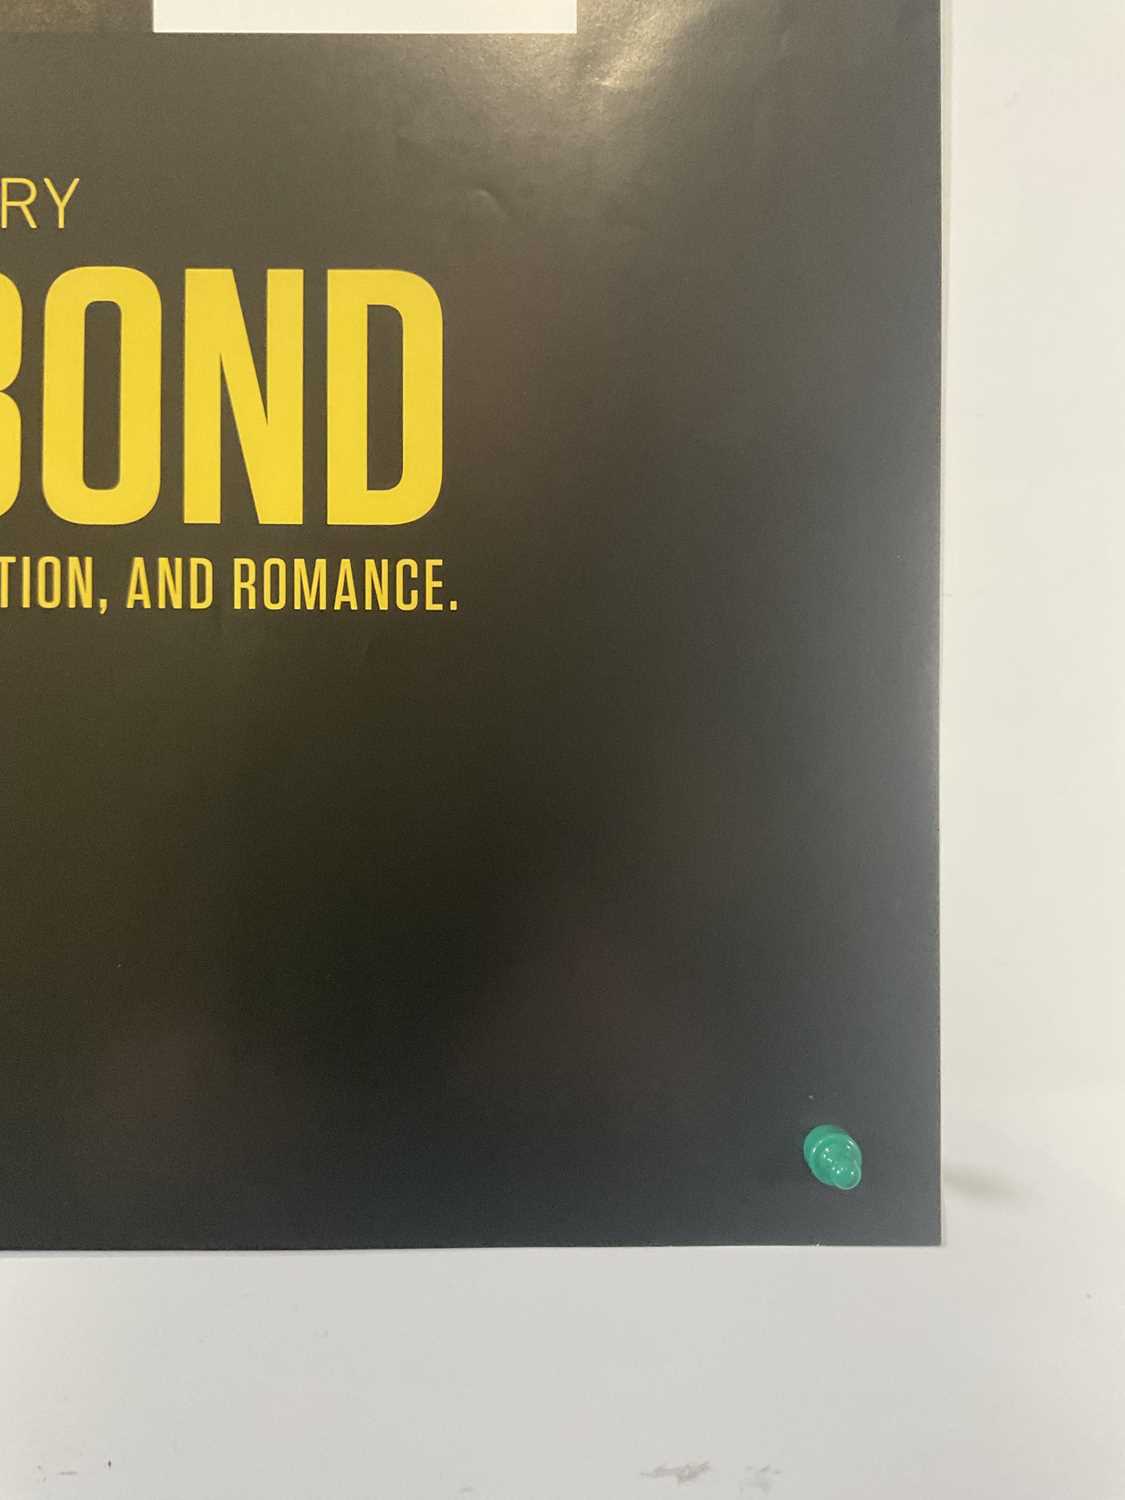 BECOMING BOND (2017) UK Quad poster for the Hulu documentary about George Lazenby, rolled - Image 5 of 5